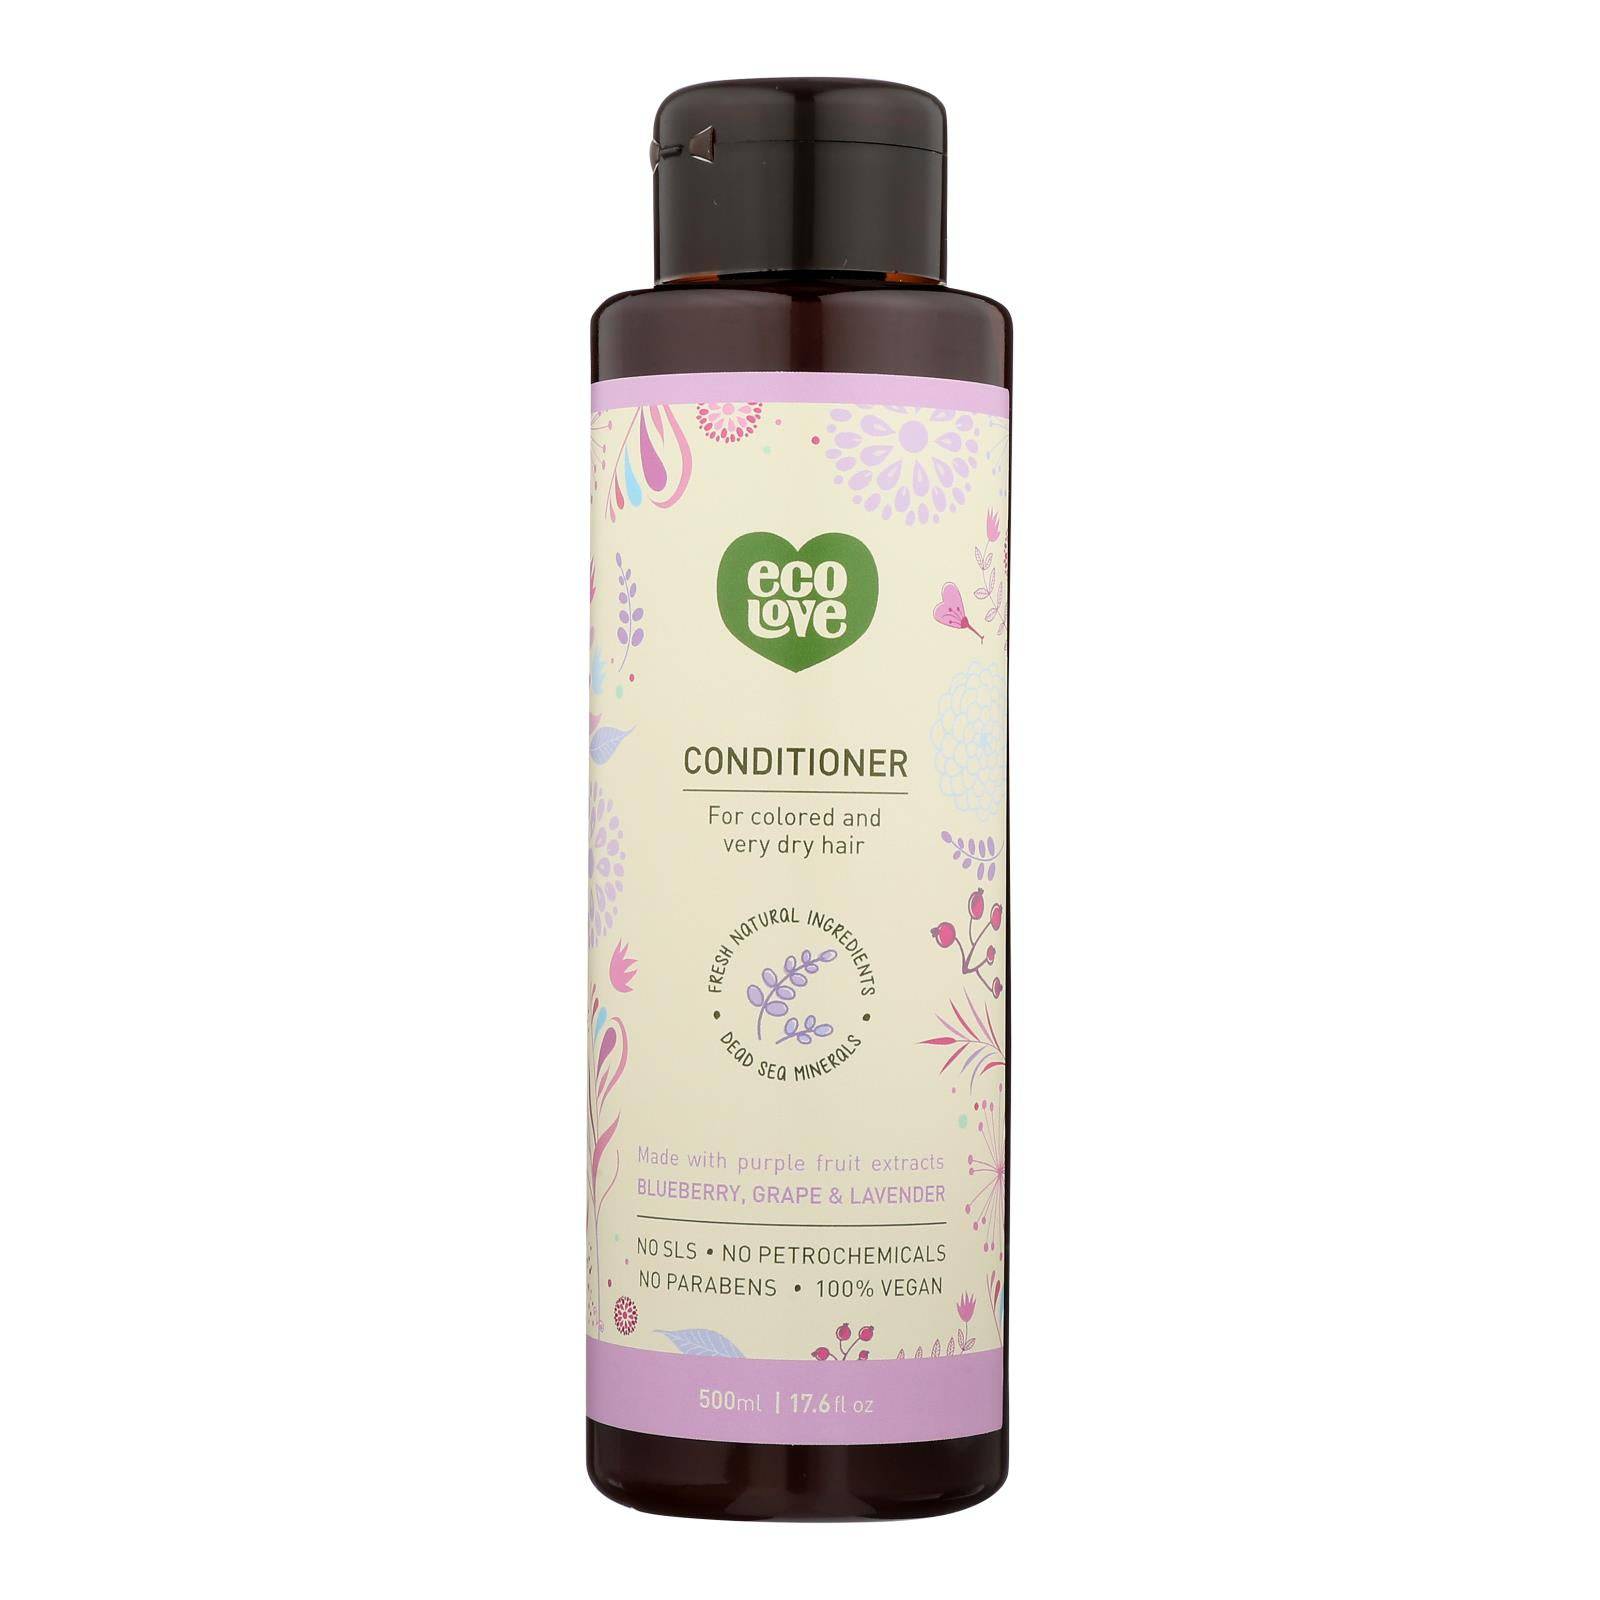 Buy Ecolove Conditioner - Purple Fruit Conditioner For Colored And Very Dry Hair - Case Of 1 - 17.6 Fl Oz.  at OnlyNaturals.us